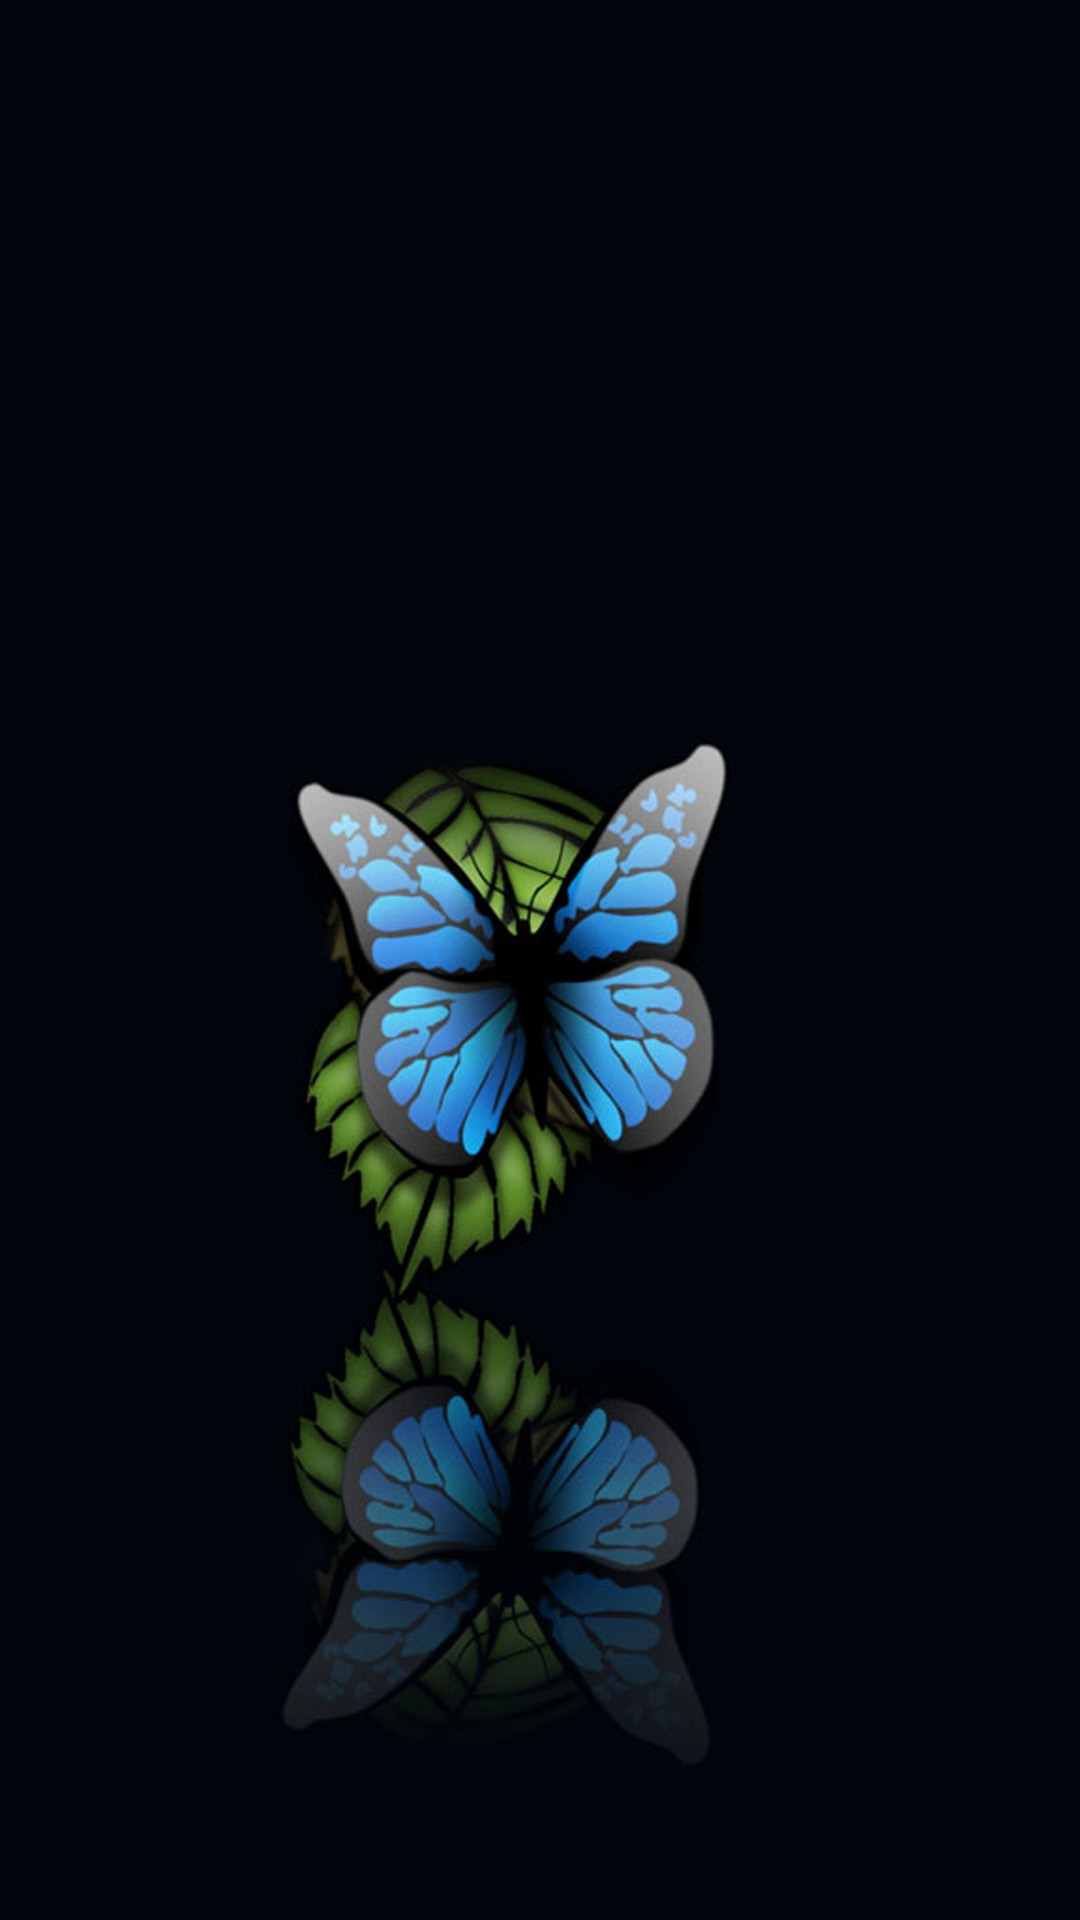 Blue Butterfly Black Background iPhone 6 Plus HD Wallpaper ...